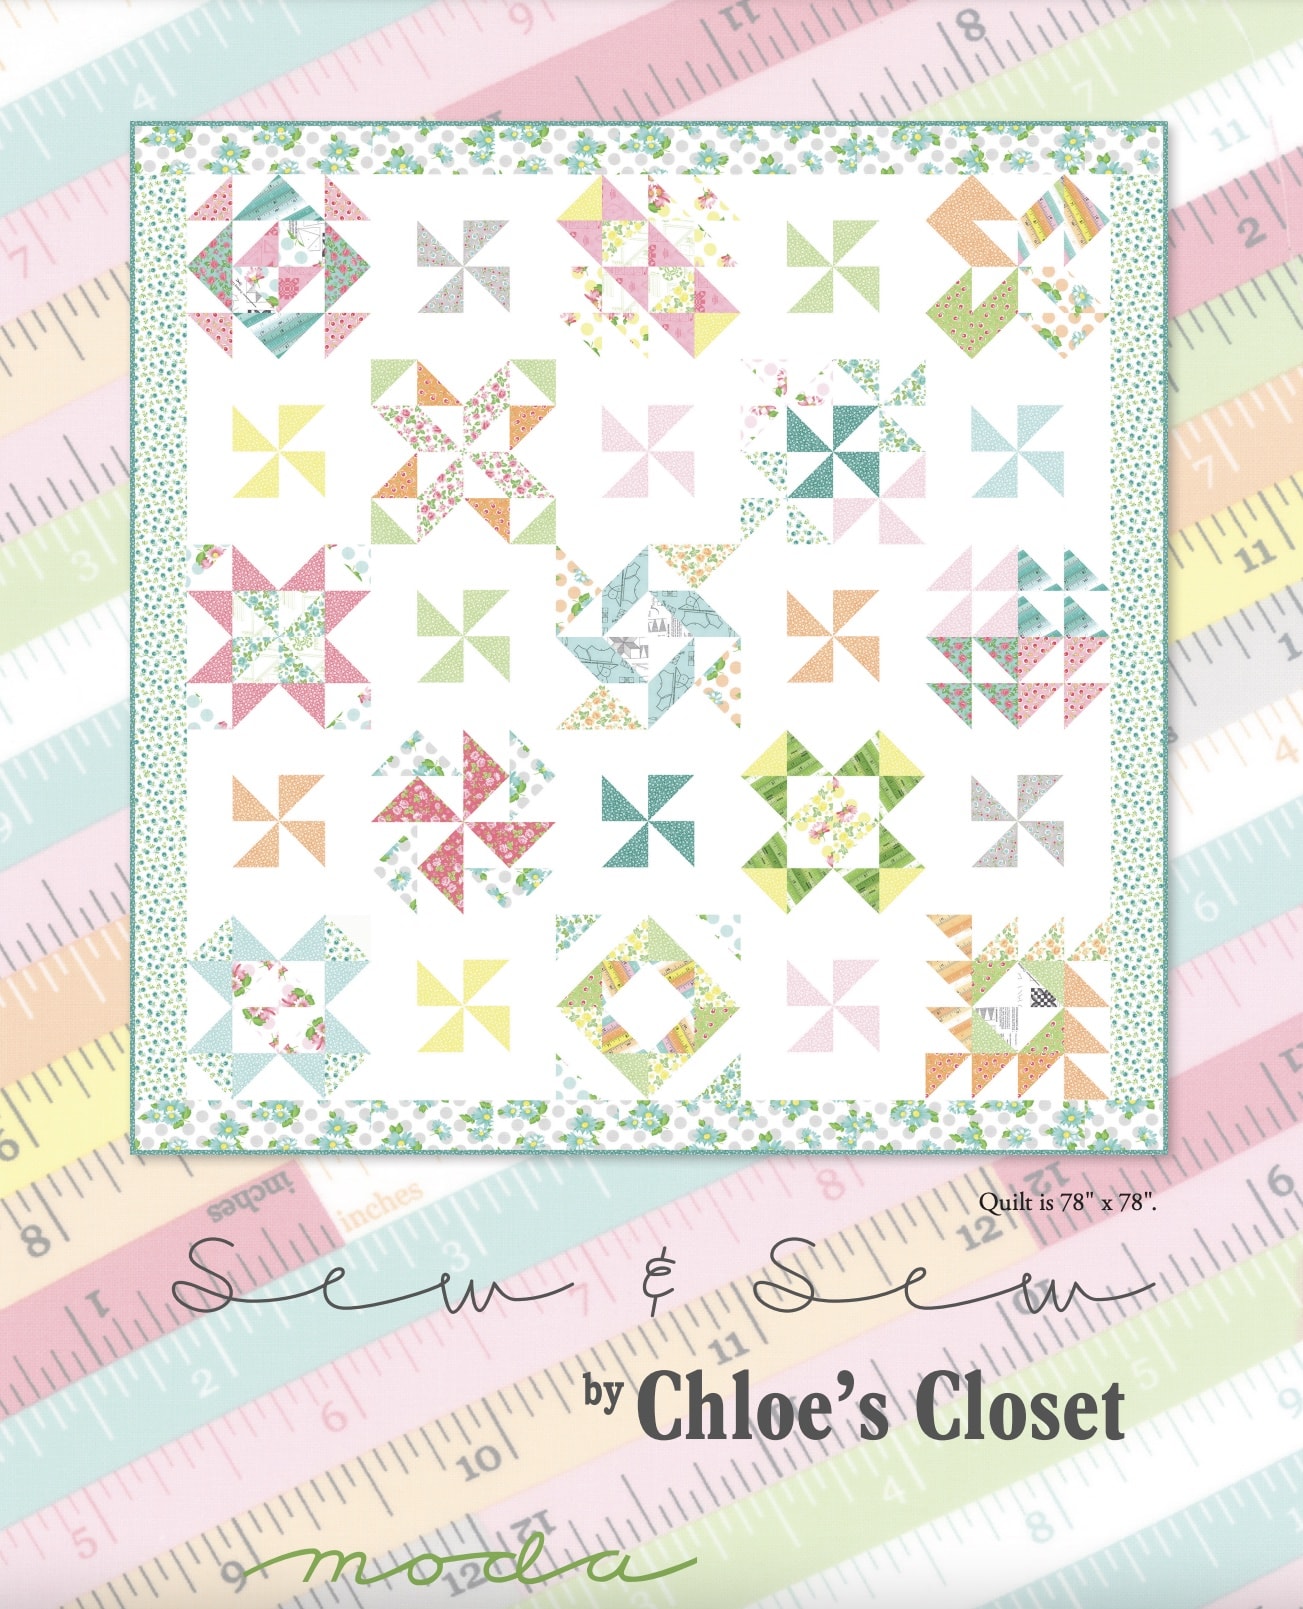 sew and sew free layer cake quilt pattern by chloe's closet for moda. get your free pattern now and get quilting! It's so much fun and easier if you use layer cakes, honey comb packs and beautiful precut fabric!